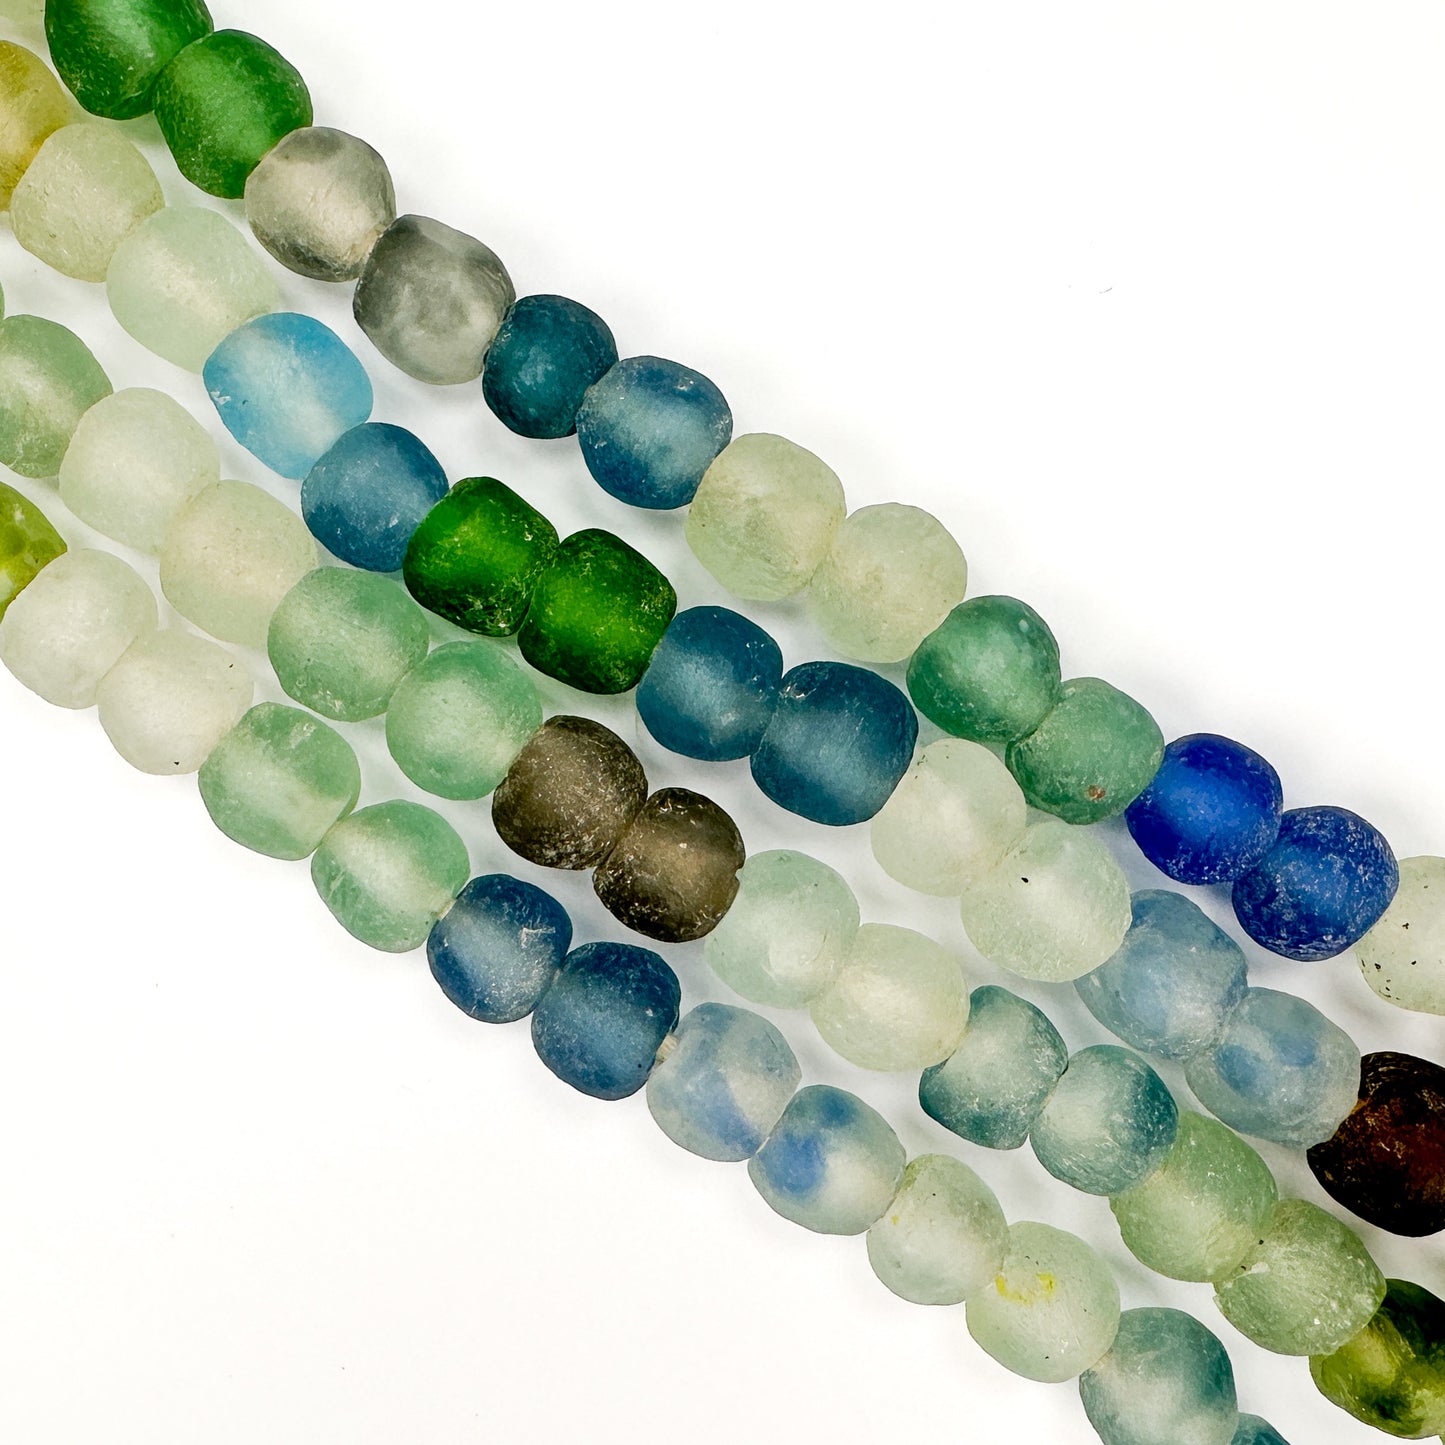 Aquarium Mix 14mm African Recycled Glass Bead (2 Quantities Available)-The Bead Gallery Honolulu